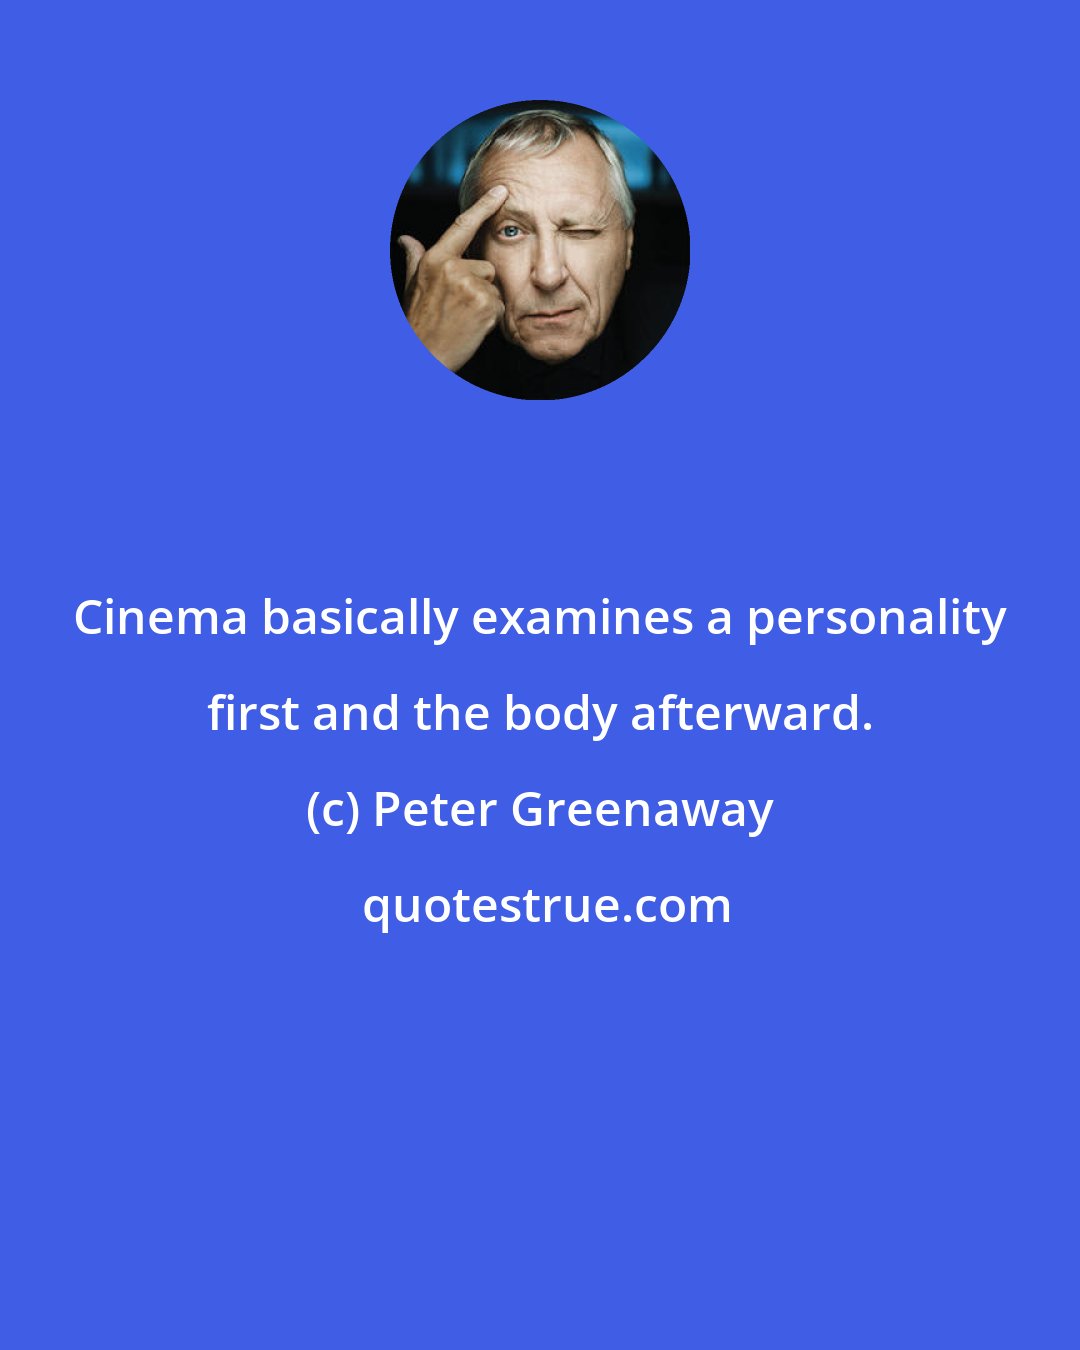 Peter Greenaway: Cinema basically examines a personality first and the body afterward.